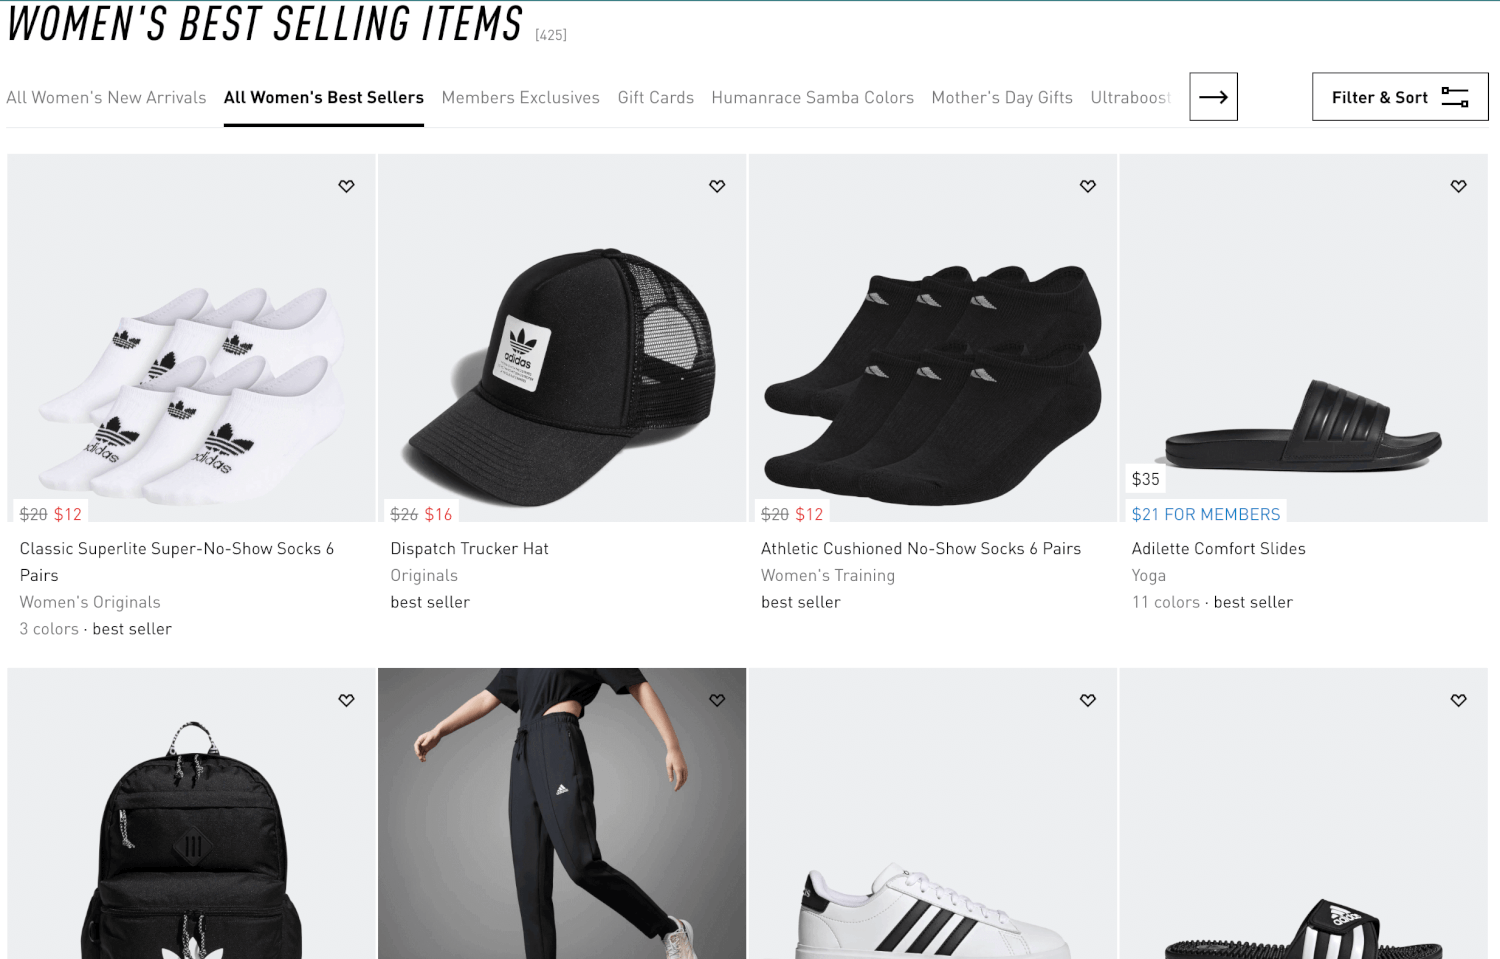 An example of website personalization by Adidas